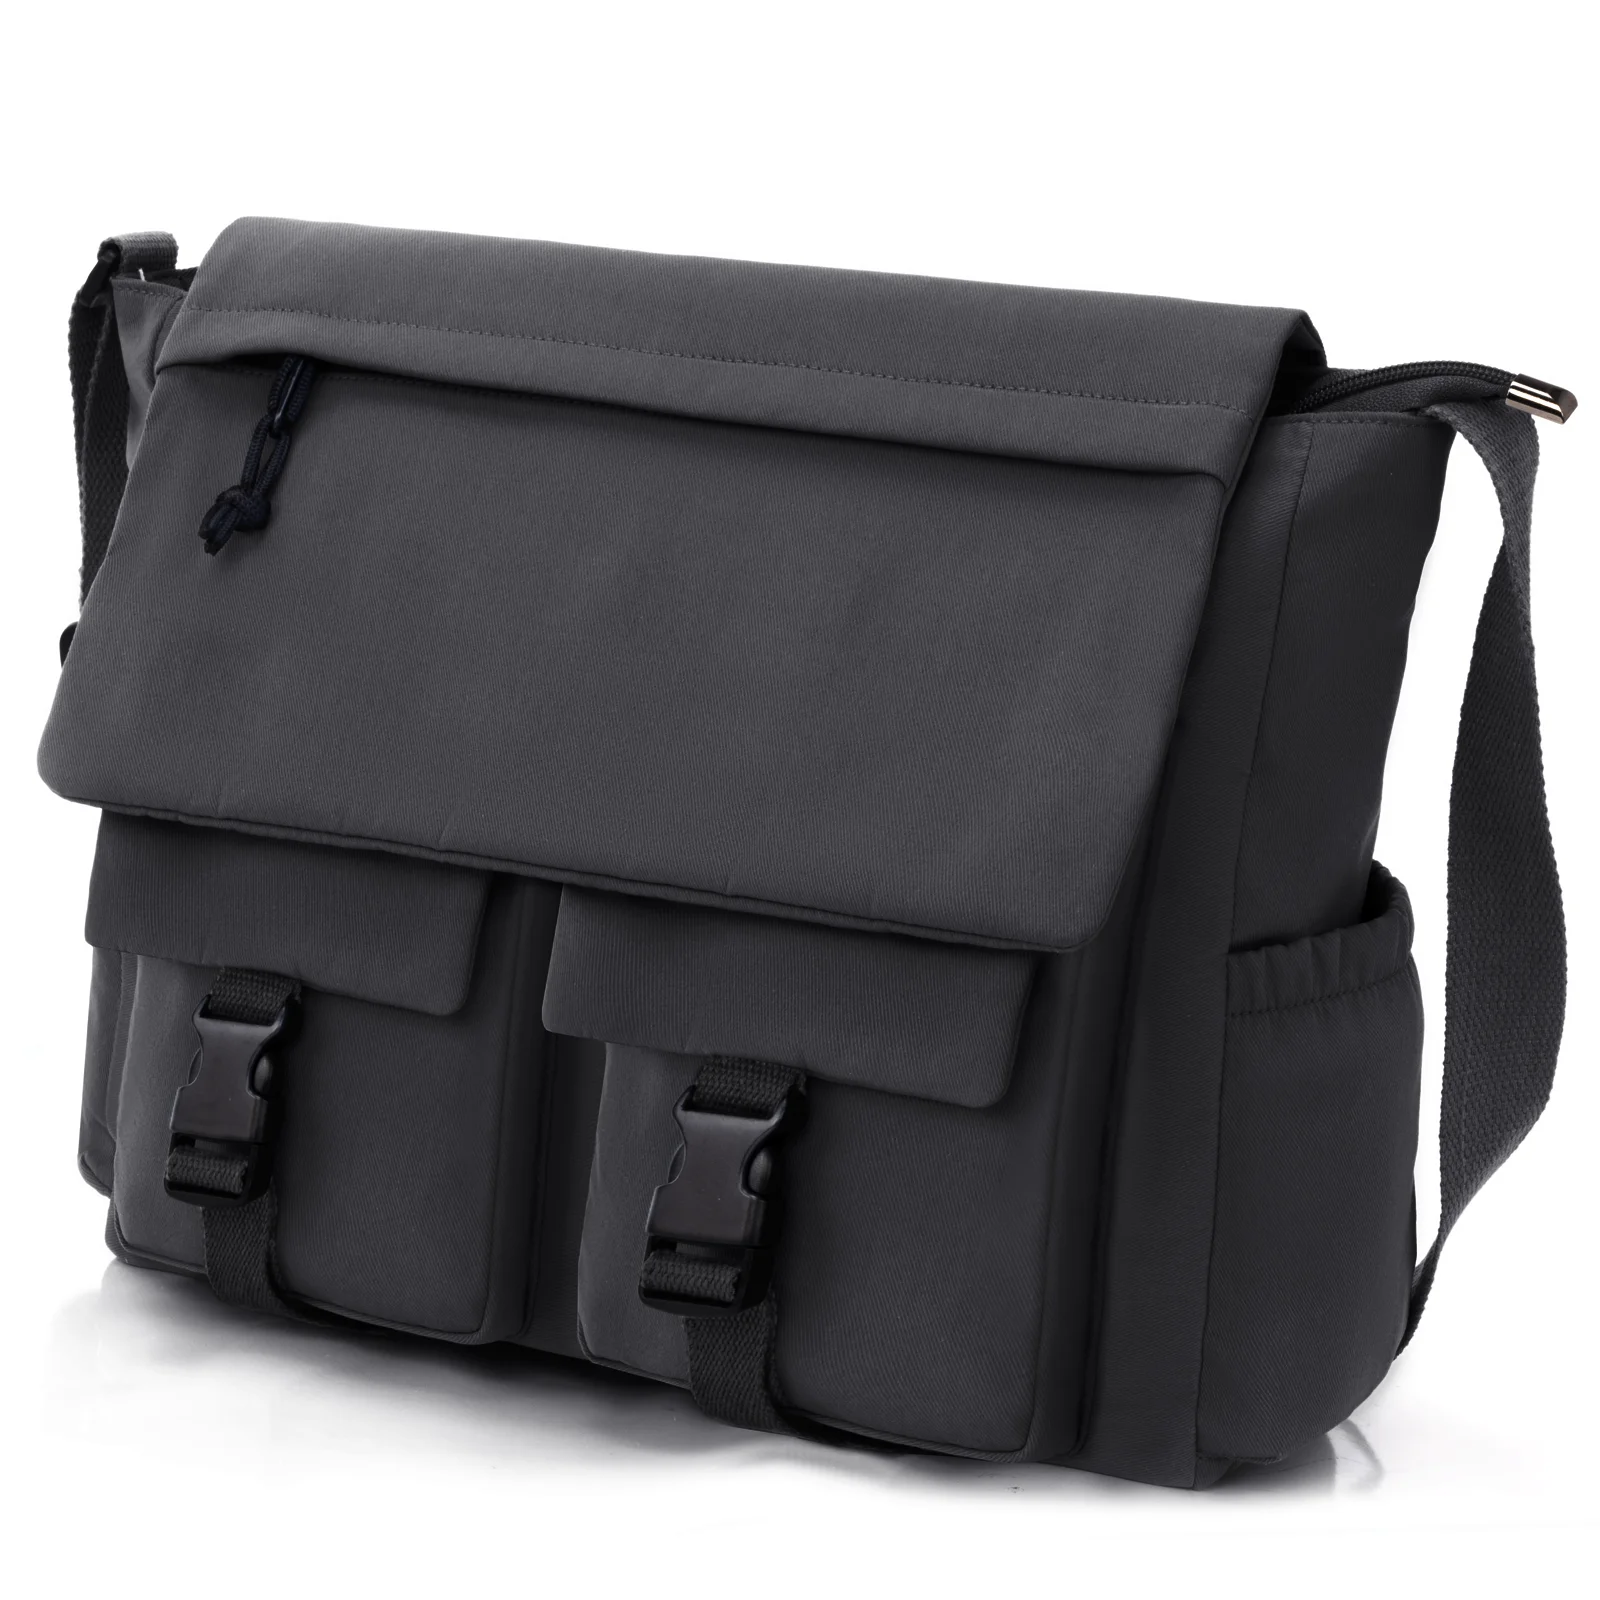 

Shoulder bag unisex casual summer messenger bag student large capacity class backpack waterproof compartment multiple pockets